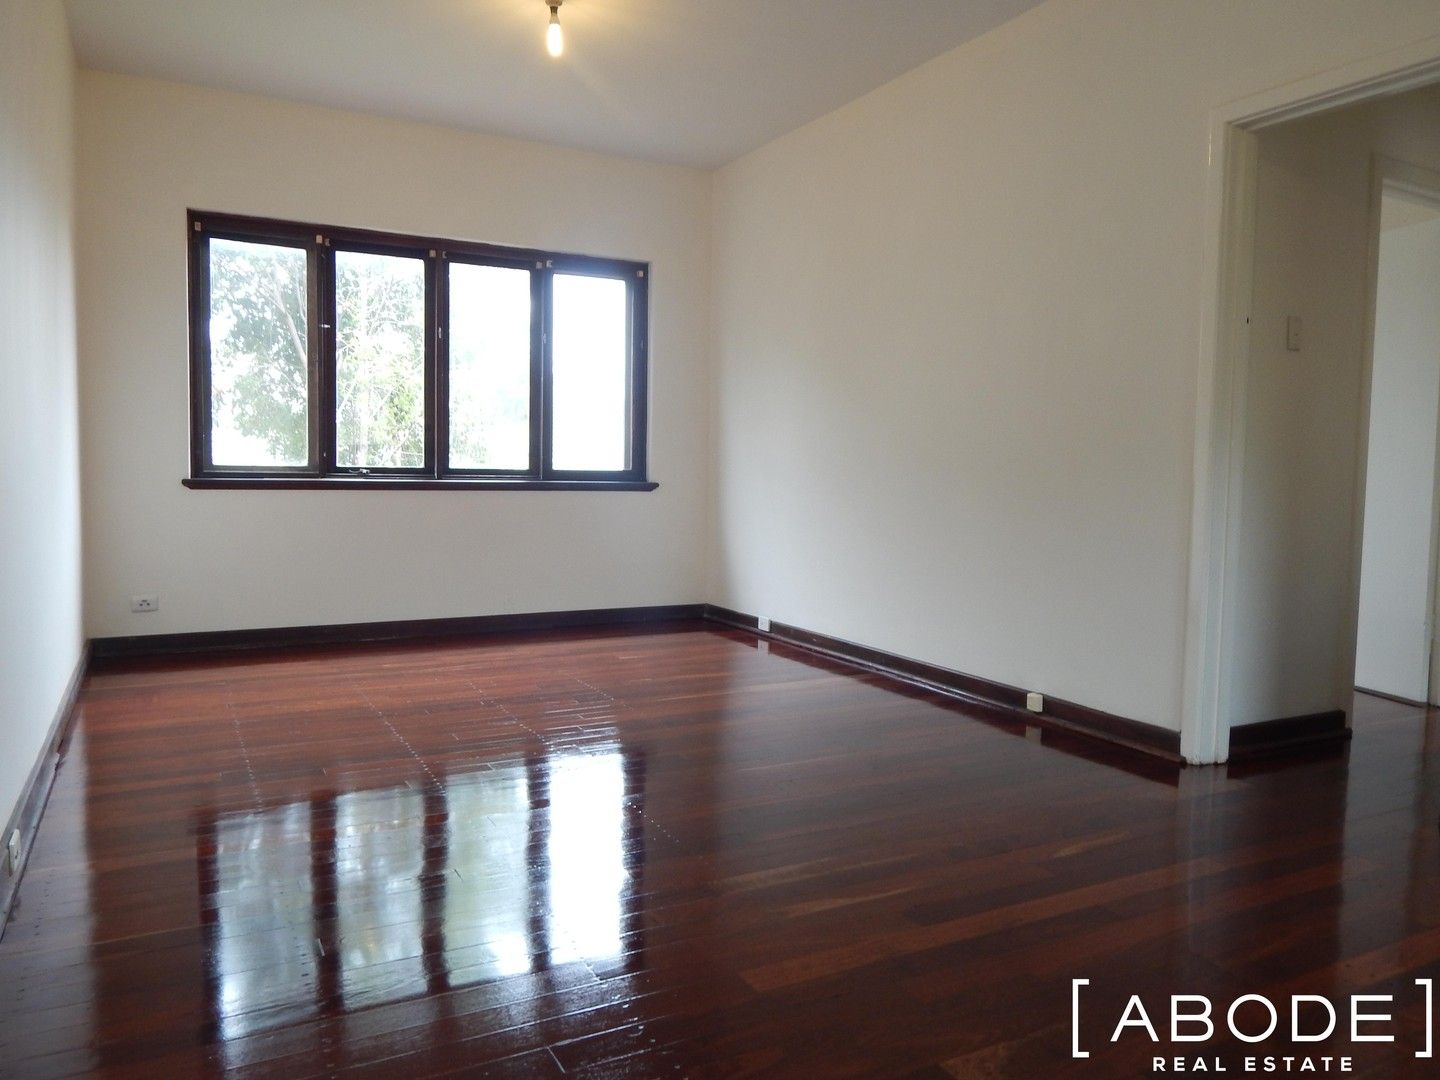 2 bedrooms Apartment / Unit / Flat in 9/454 Stirling Highway COTTESLOE WA, 6011